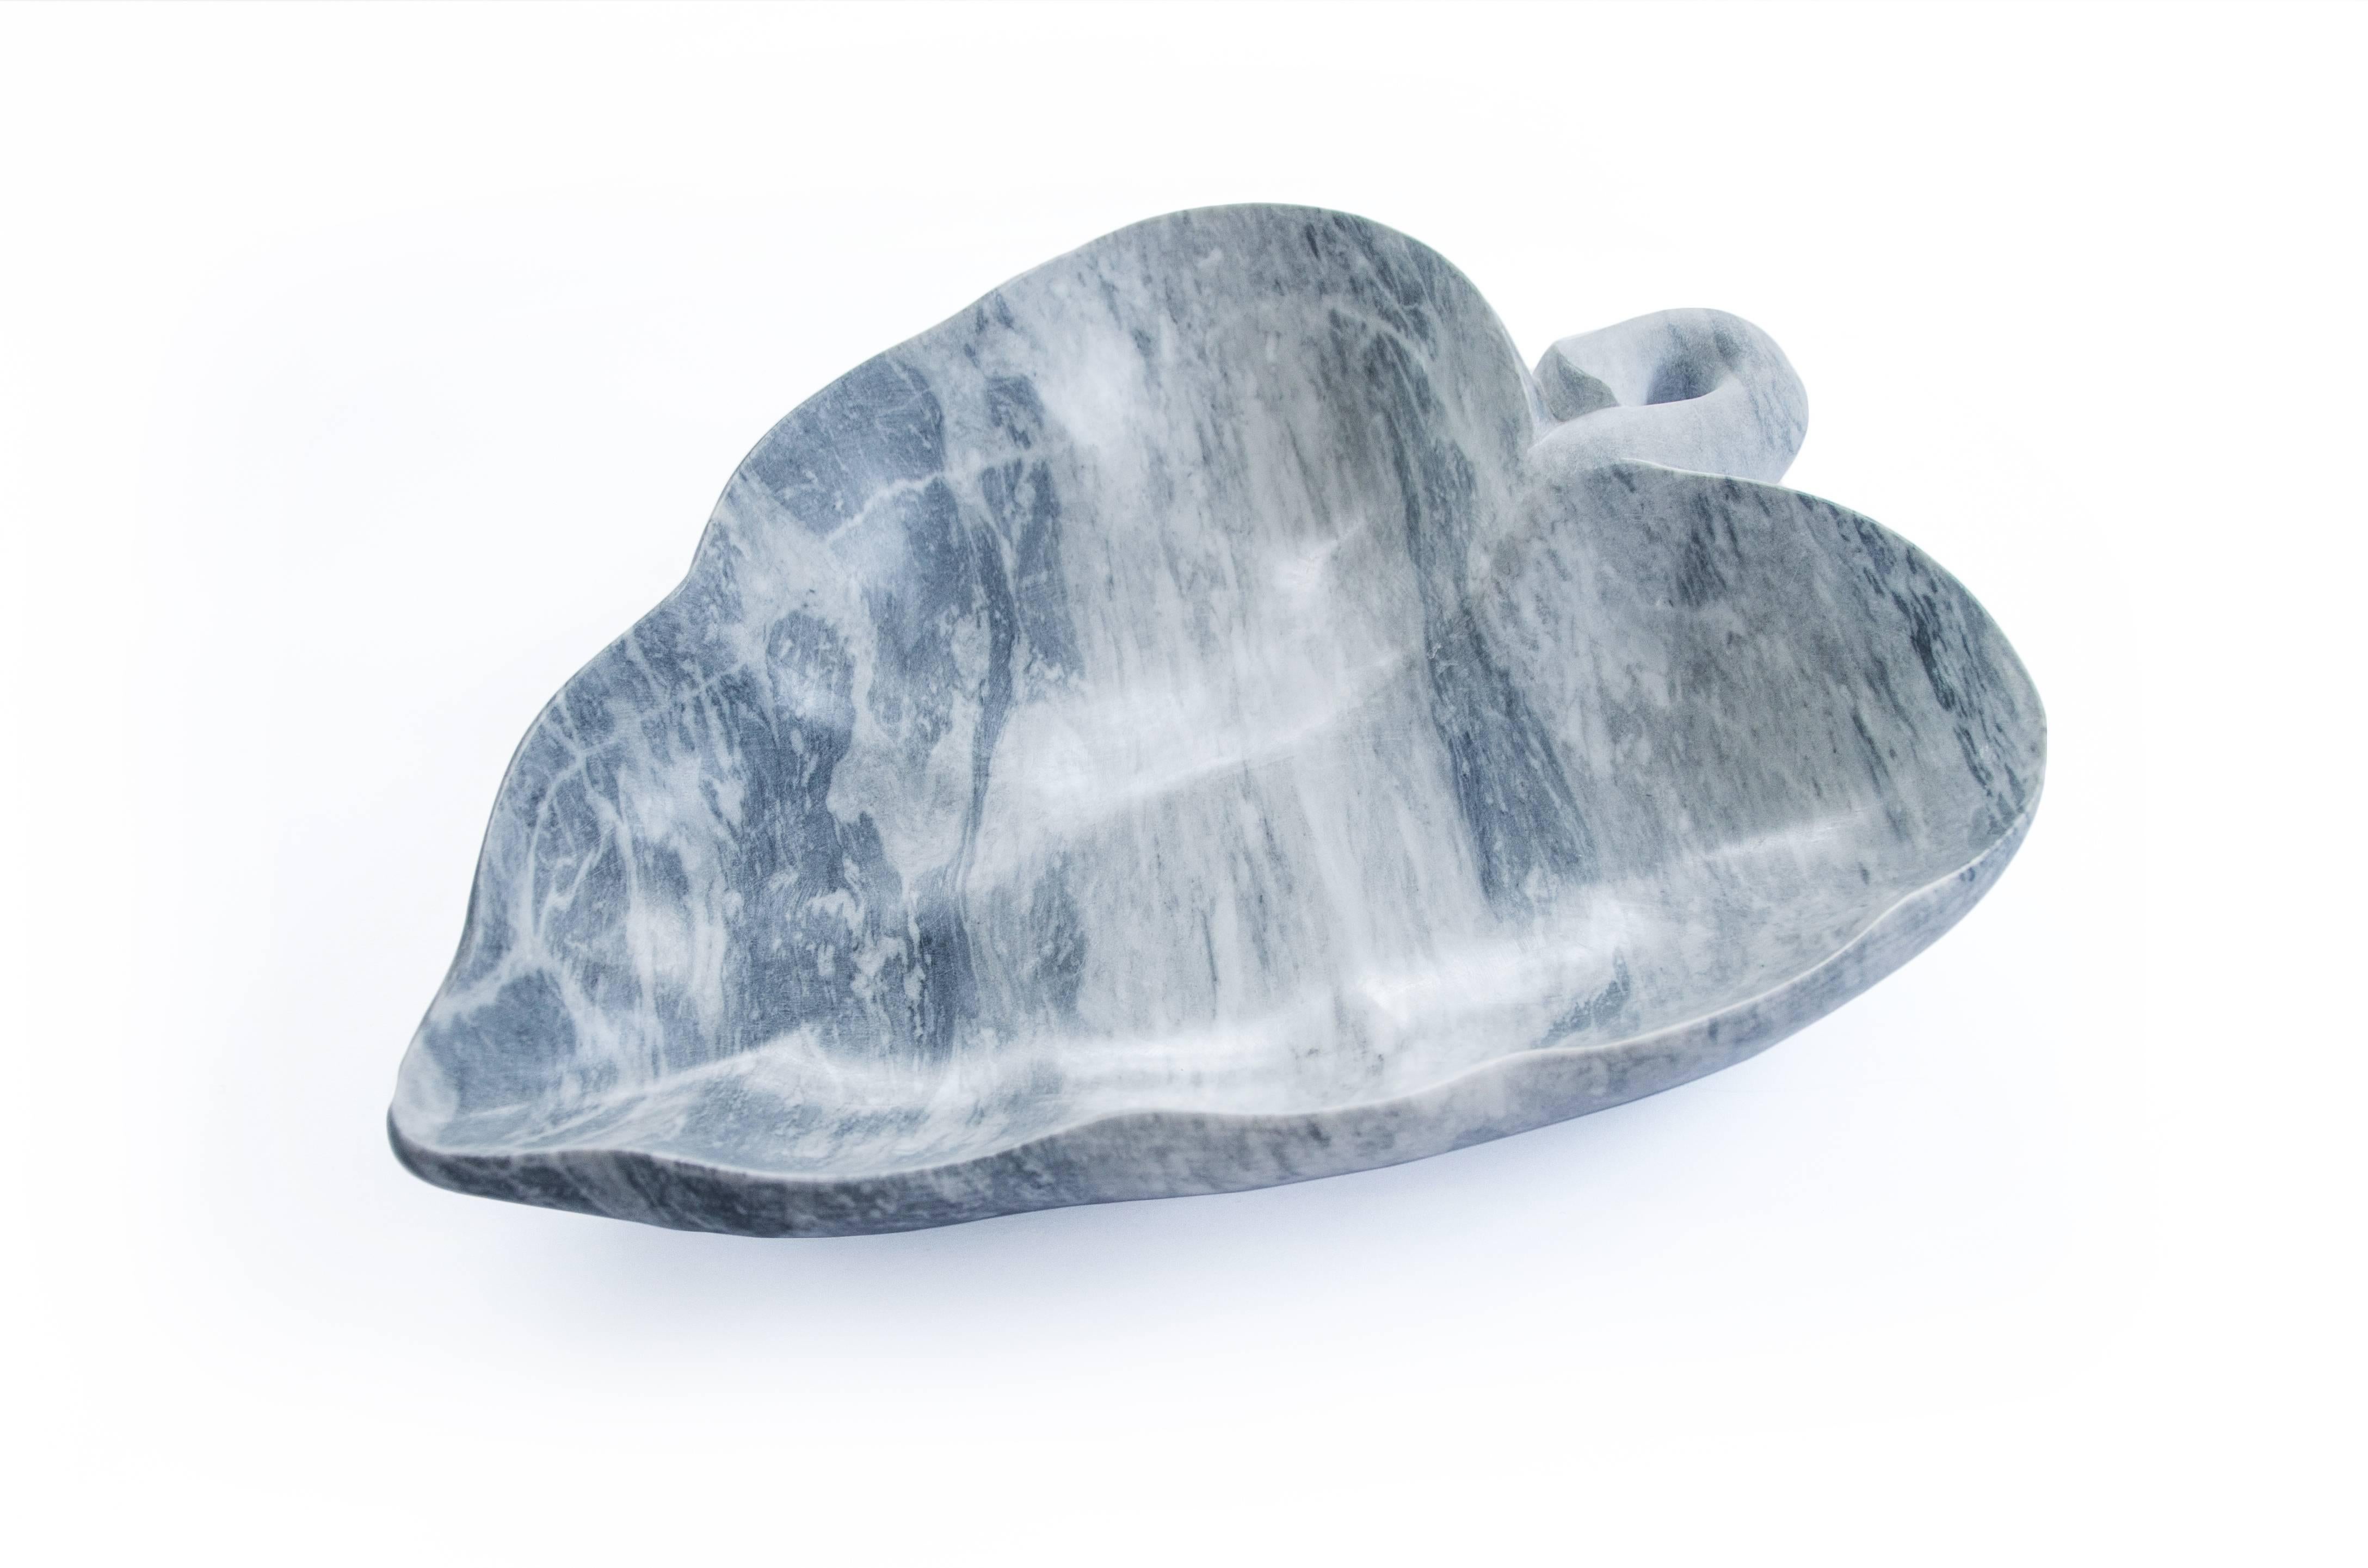 Big bowl in grey Bardiglio marble with the shape of a leaf. Each piece is in a way unique (every marble block is different in veins and shades) and handmade by Italian artisans specialized over generations in processing marble. Slight variations in